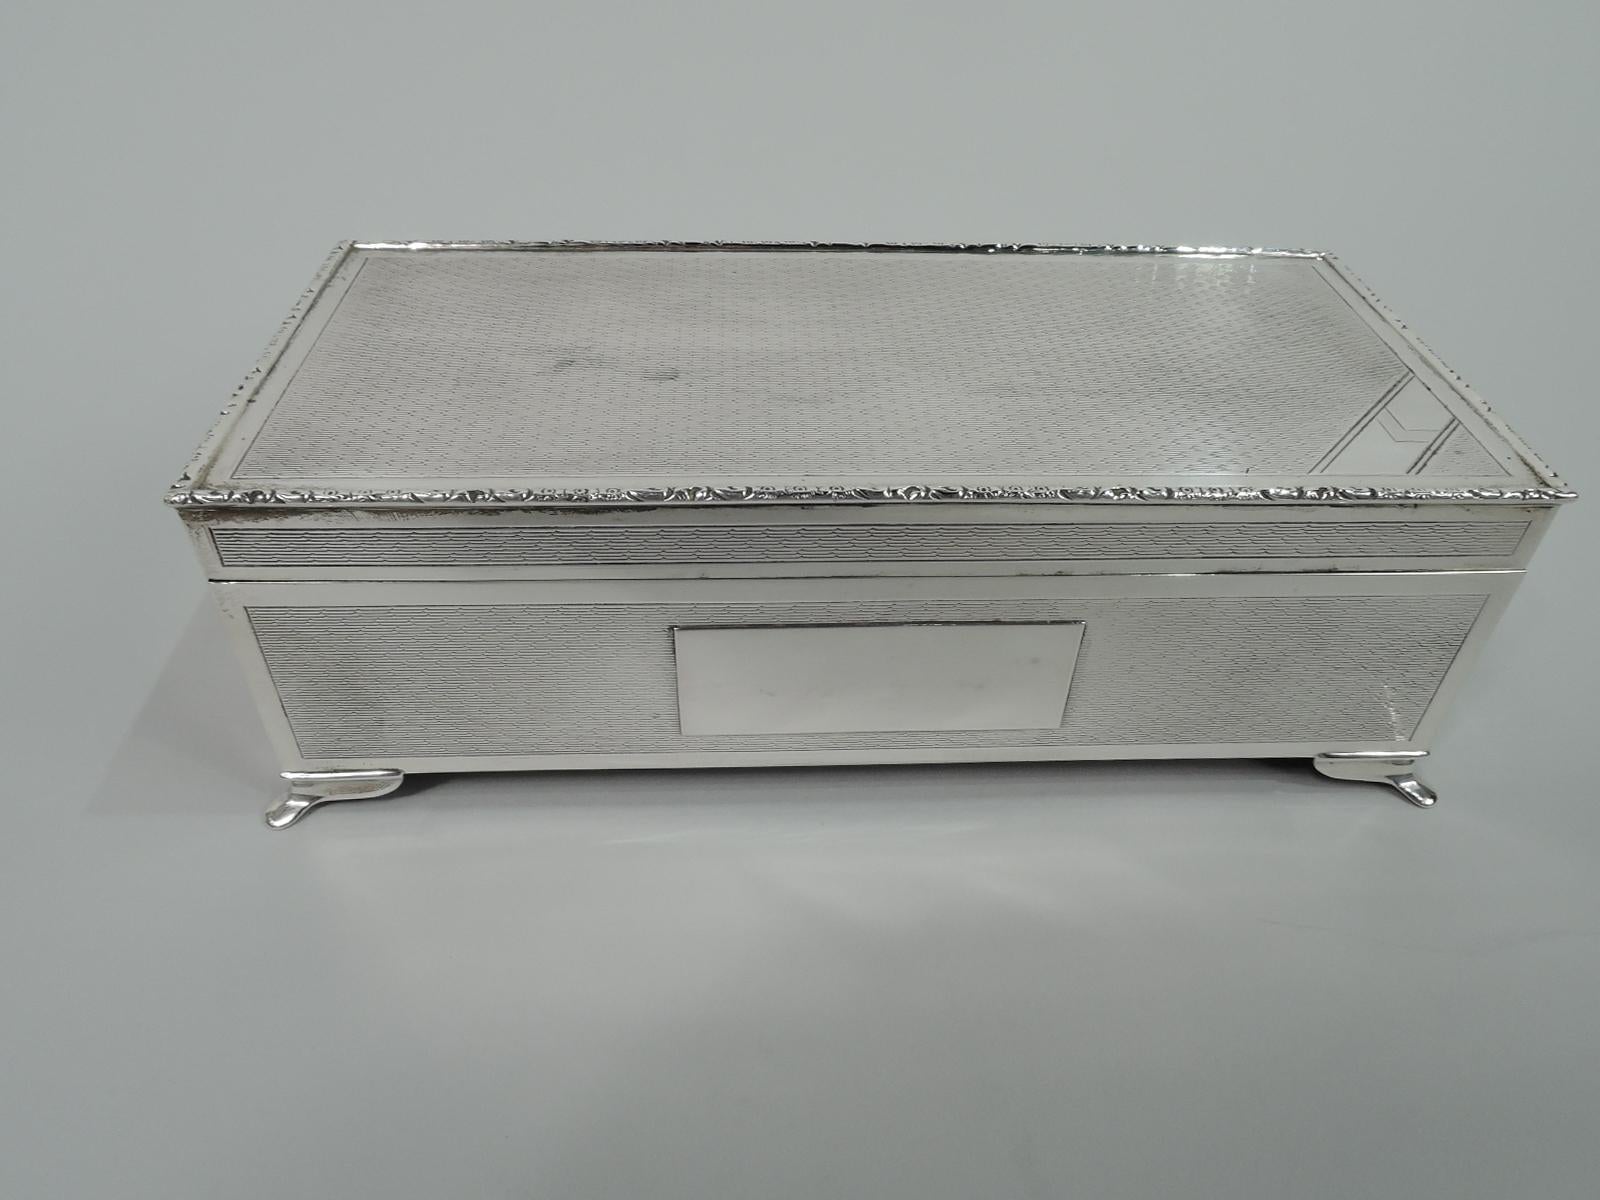 Art Deco sterling silver box. Made by Harman Bros in Birmingham in 1990. Rectangular with straight sides. Cover flat and hinged. Corner bracket supports. Engine-turned ornament in plain frames on sides and cover top. Front side has applied